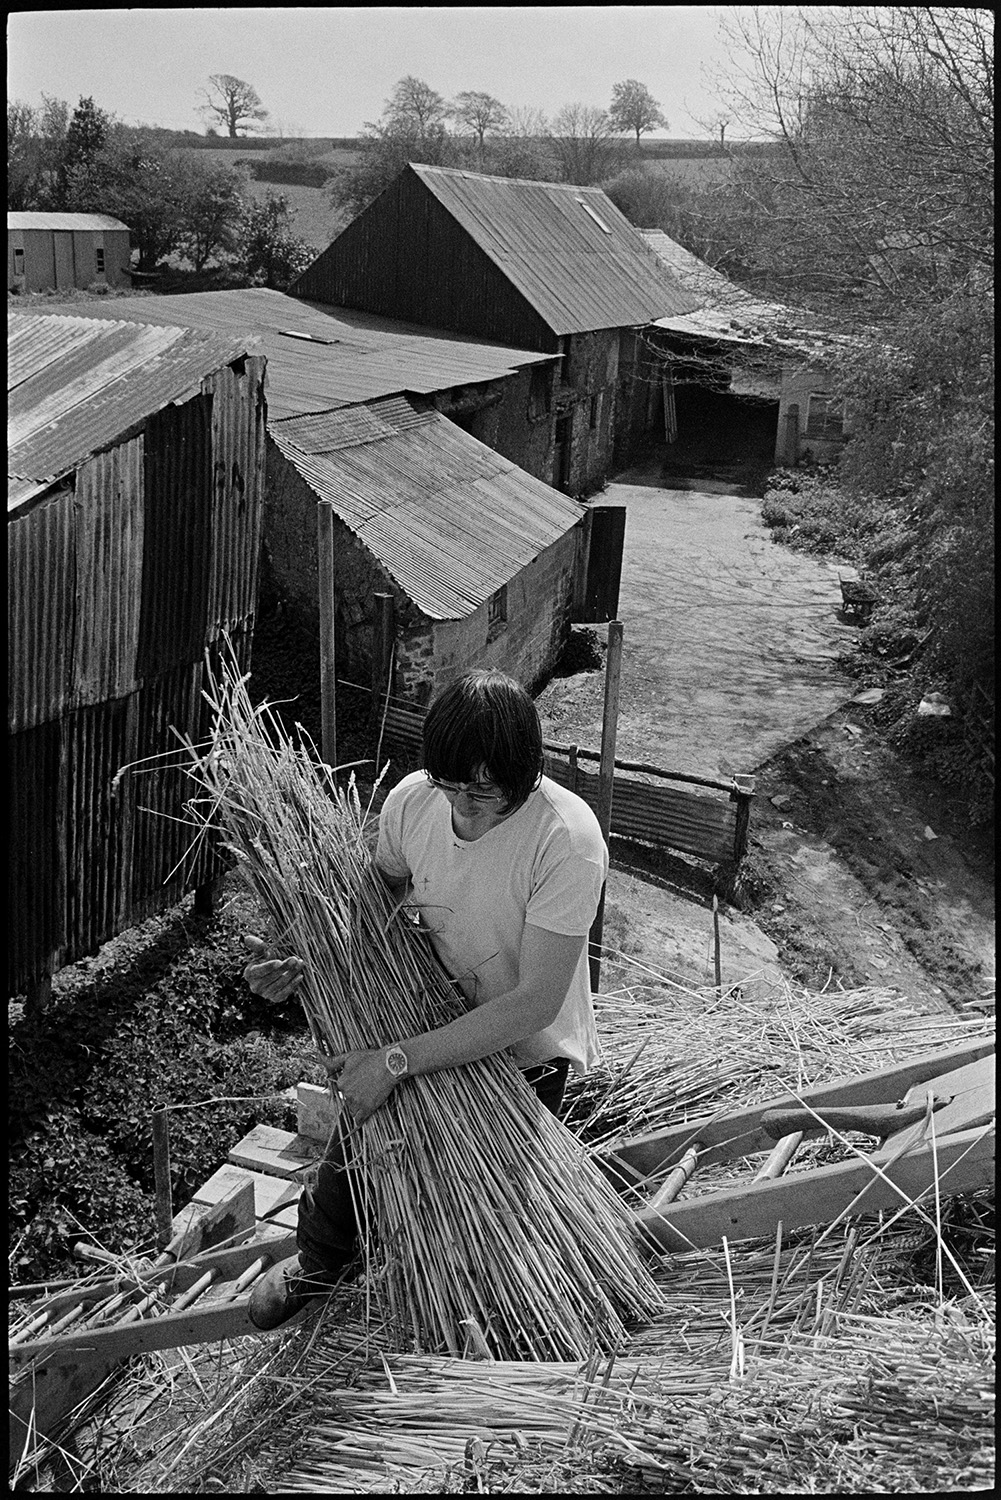 Thatcher at work on roof. 
[Nigel Gard thatching a rood at Woodtown, Dolton. He is up a ladder on the roof holding a nitch of reed. Farm buildings and barns can be seen in the background.]